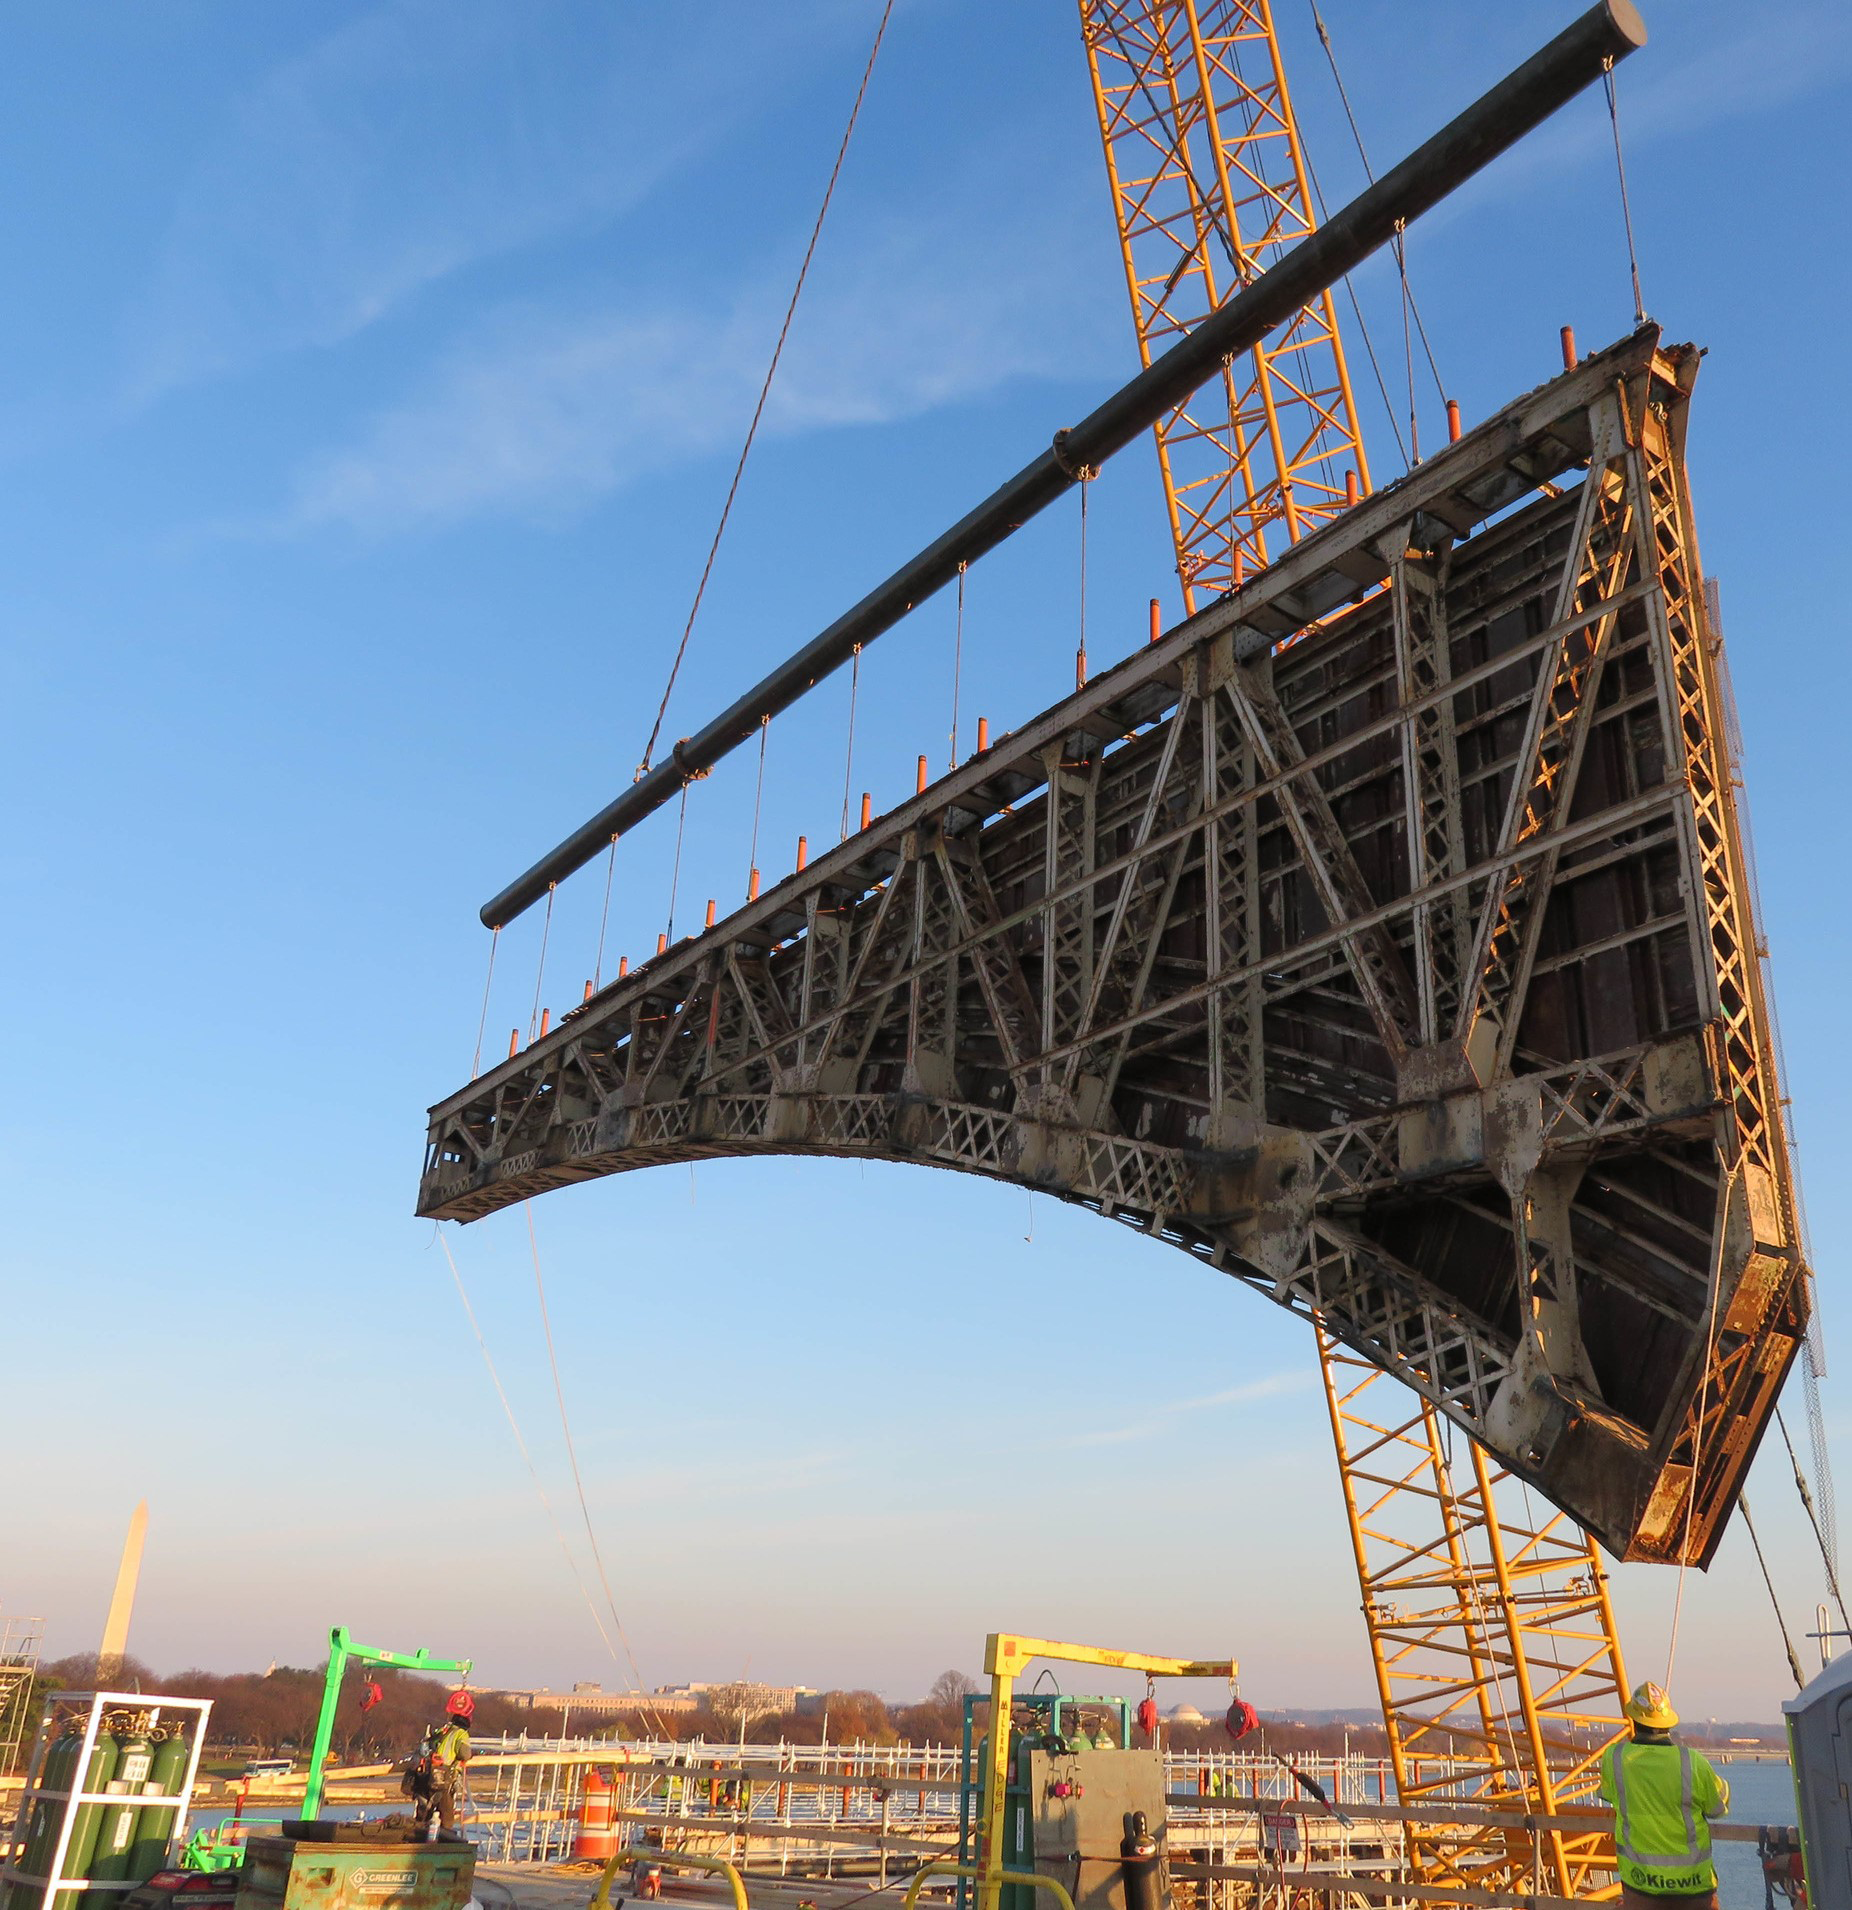 The National Park Service and Federal Highway Administration are rehabilitating the 90-year-old Arlington Memorial Bridge, one of the largest transportation projects in National Park Service history.